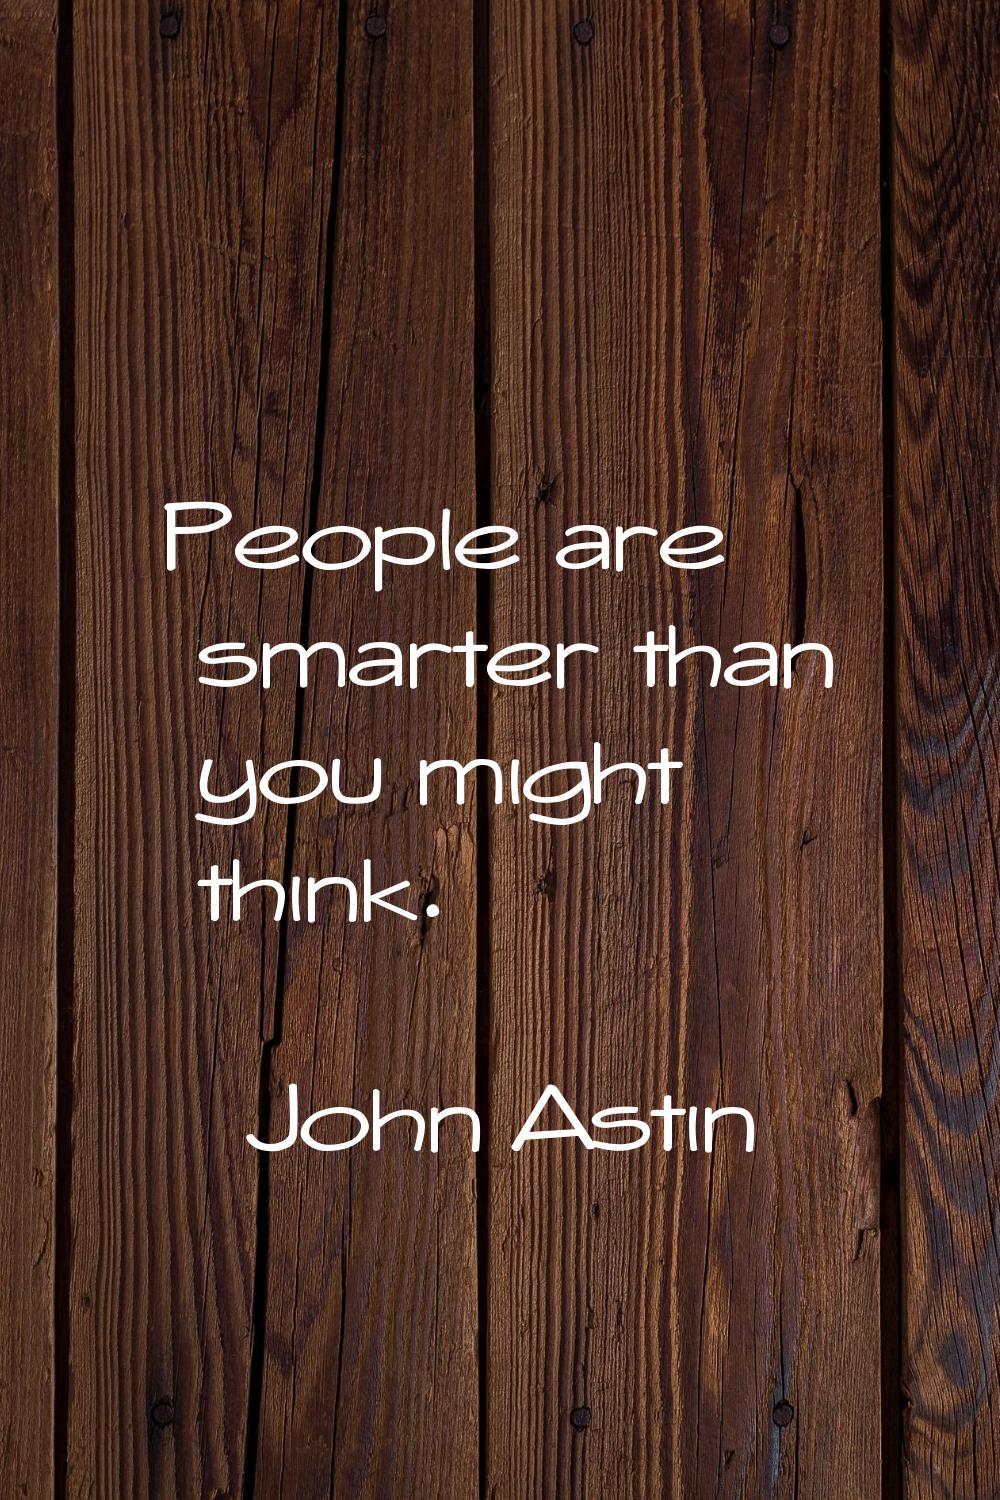 People are smarter than you might think.